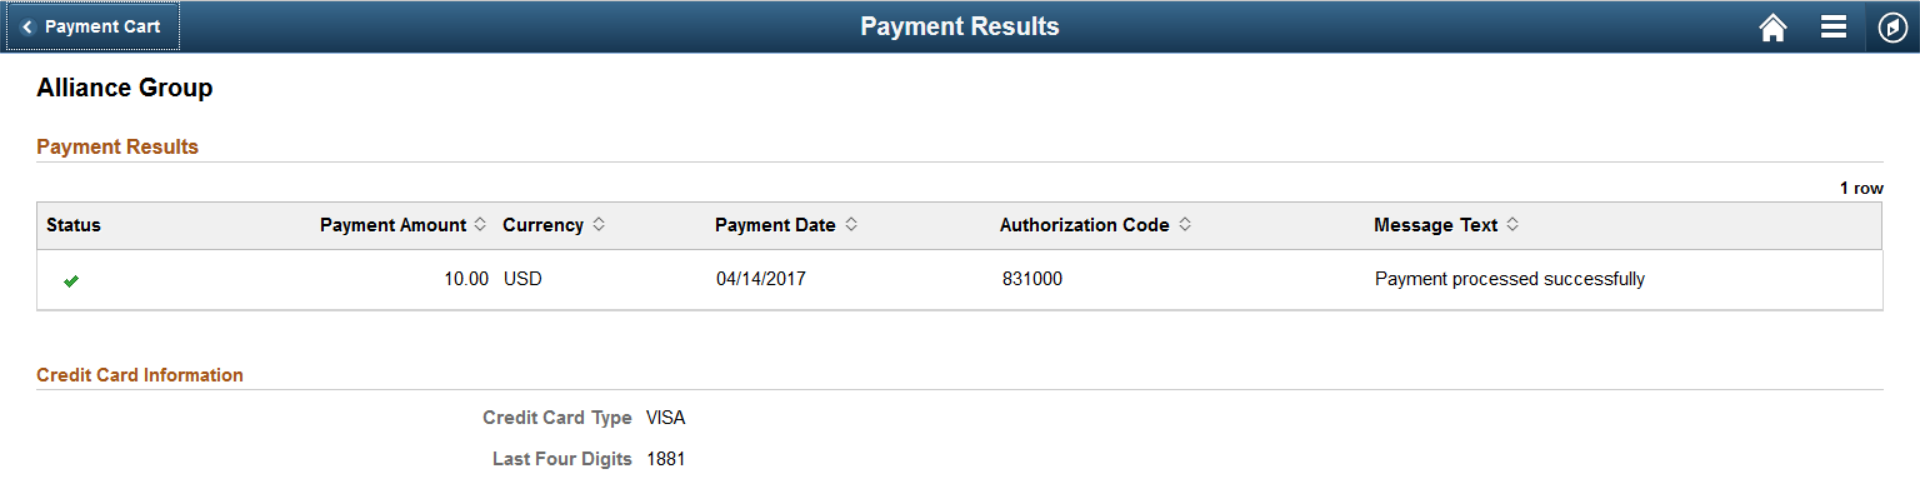 Payment Results page for a credit card payment (LFF)